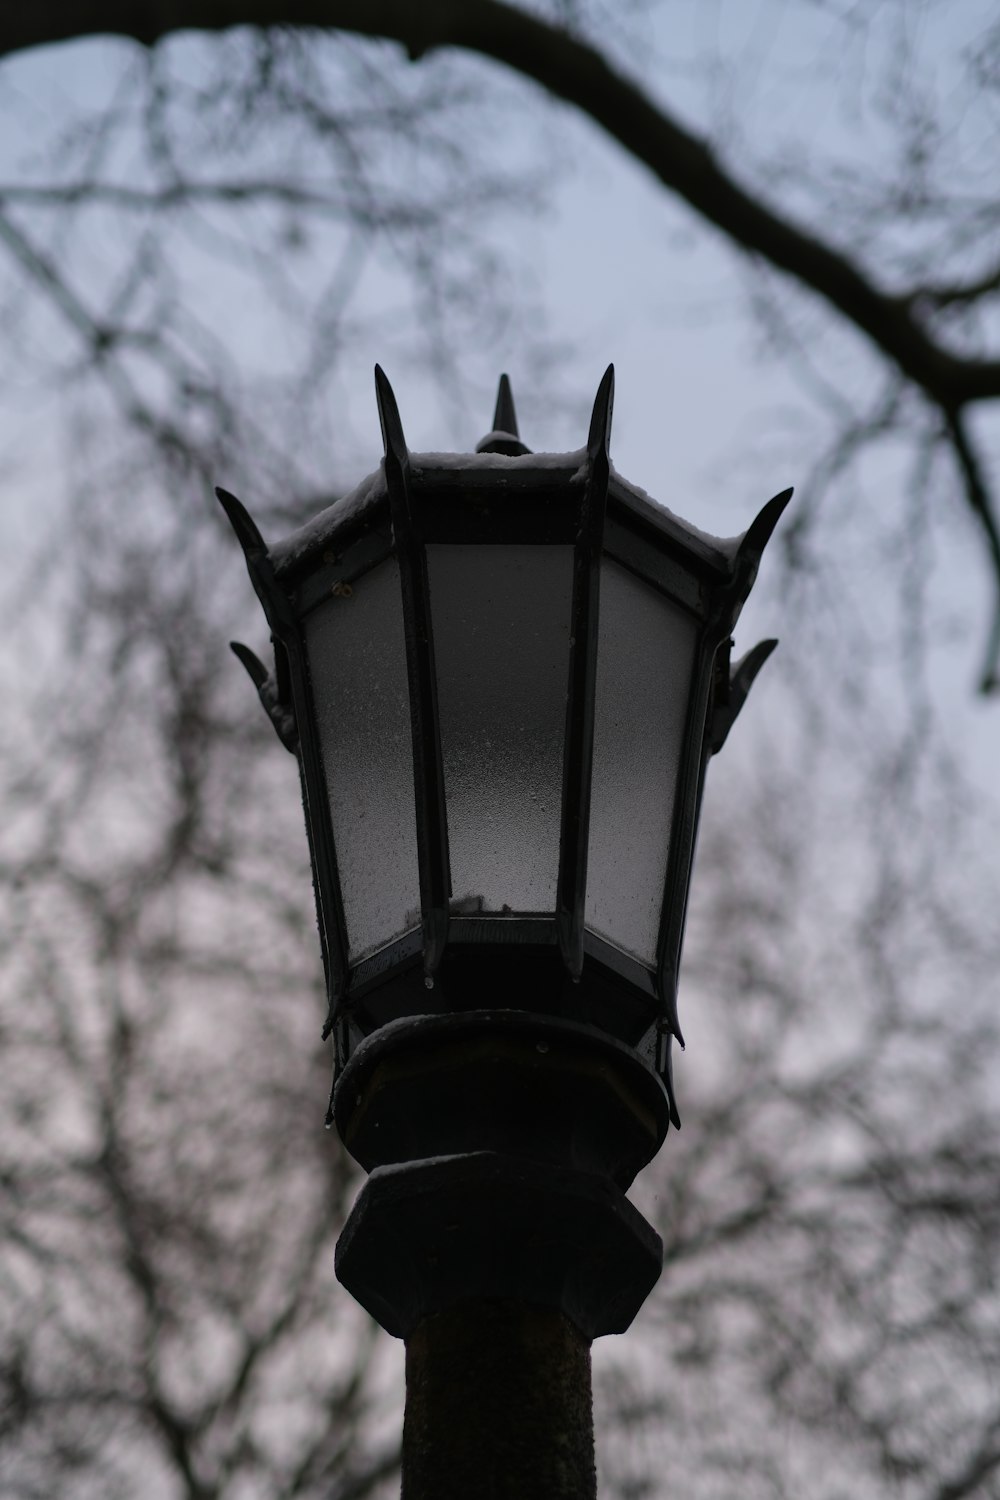 a lamp post with a tree in the background